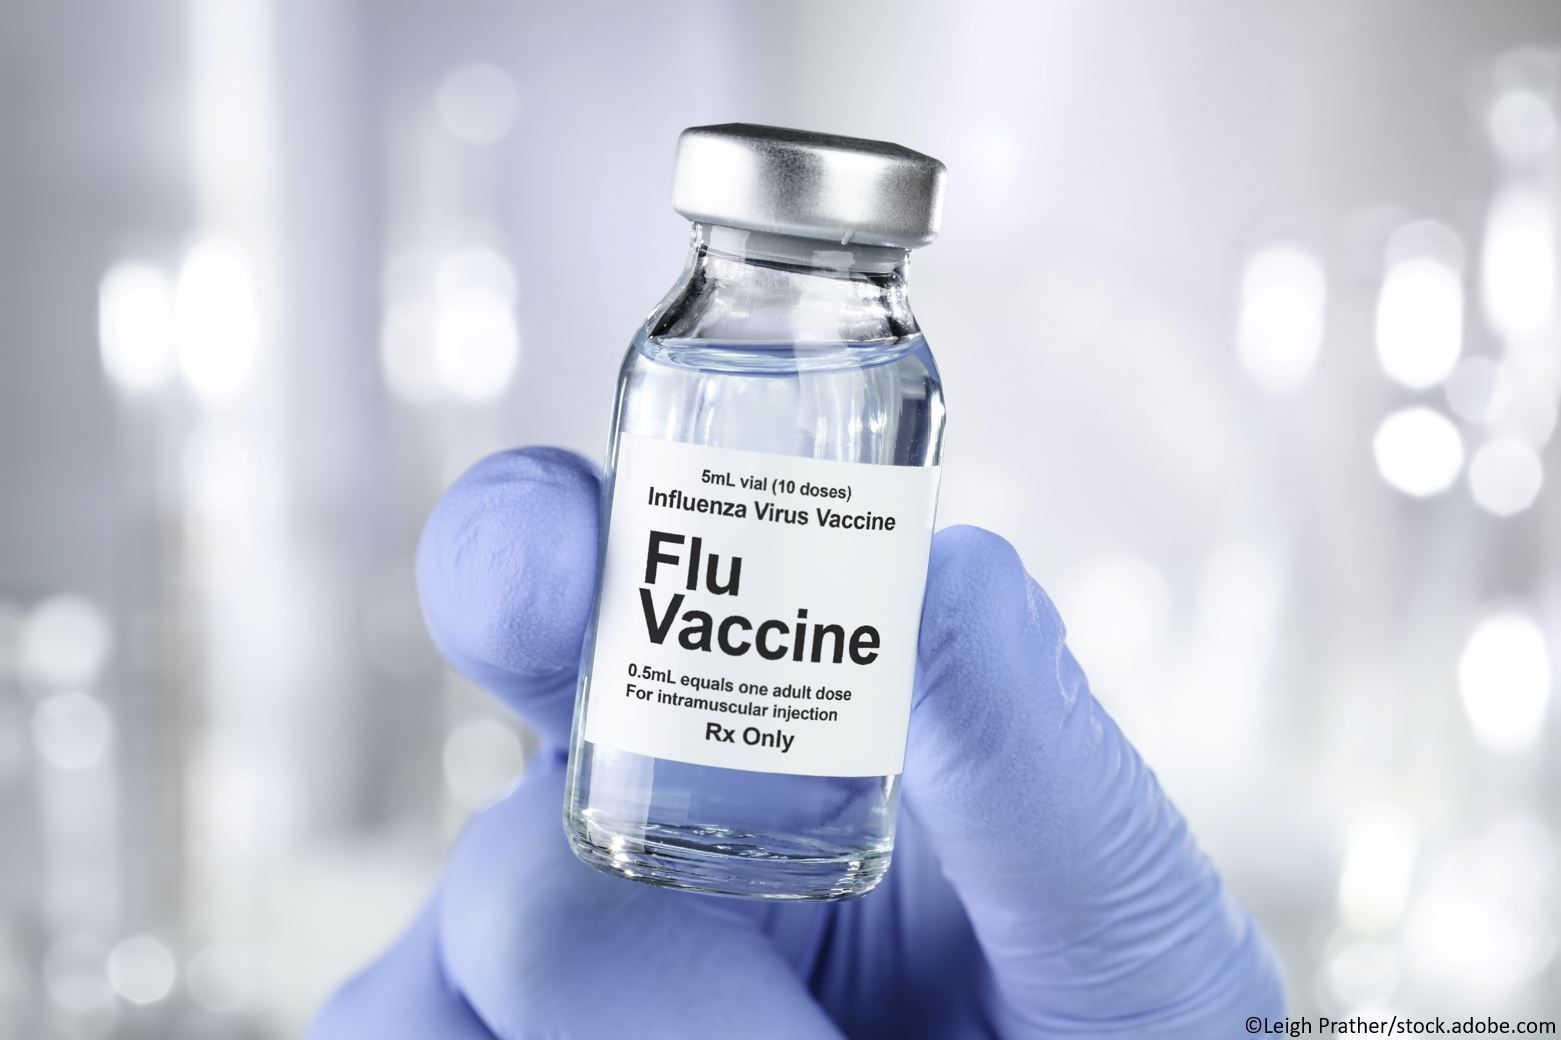 IDWeek 2023: Seasonal Flu Vaccine Offers More Protection for Immunocompetent Adults than Immunocompromised Peers, but “Difference not Statistically Significant” - Patient Care Online